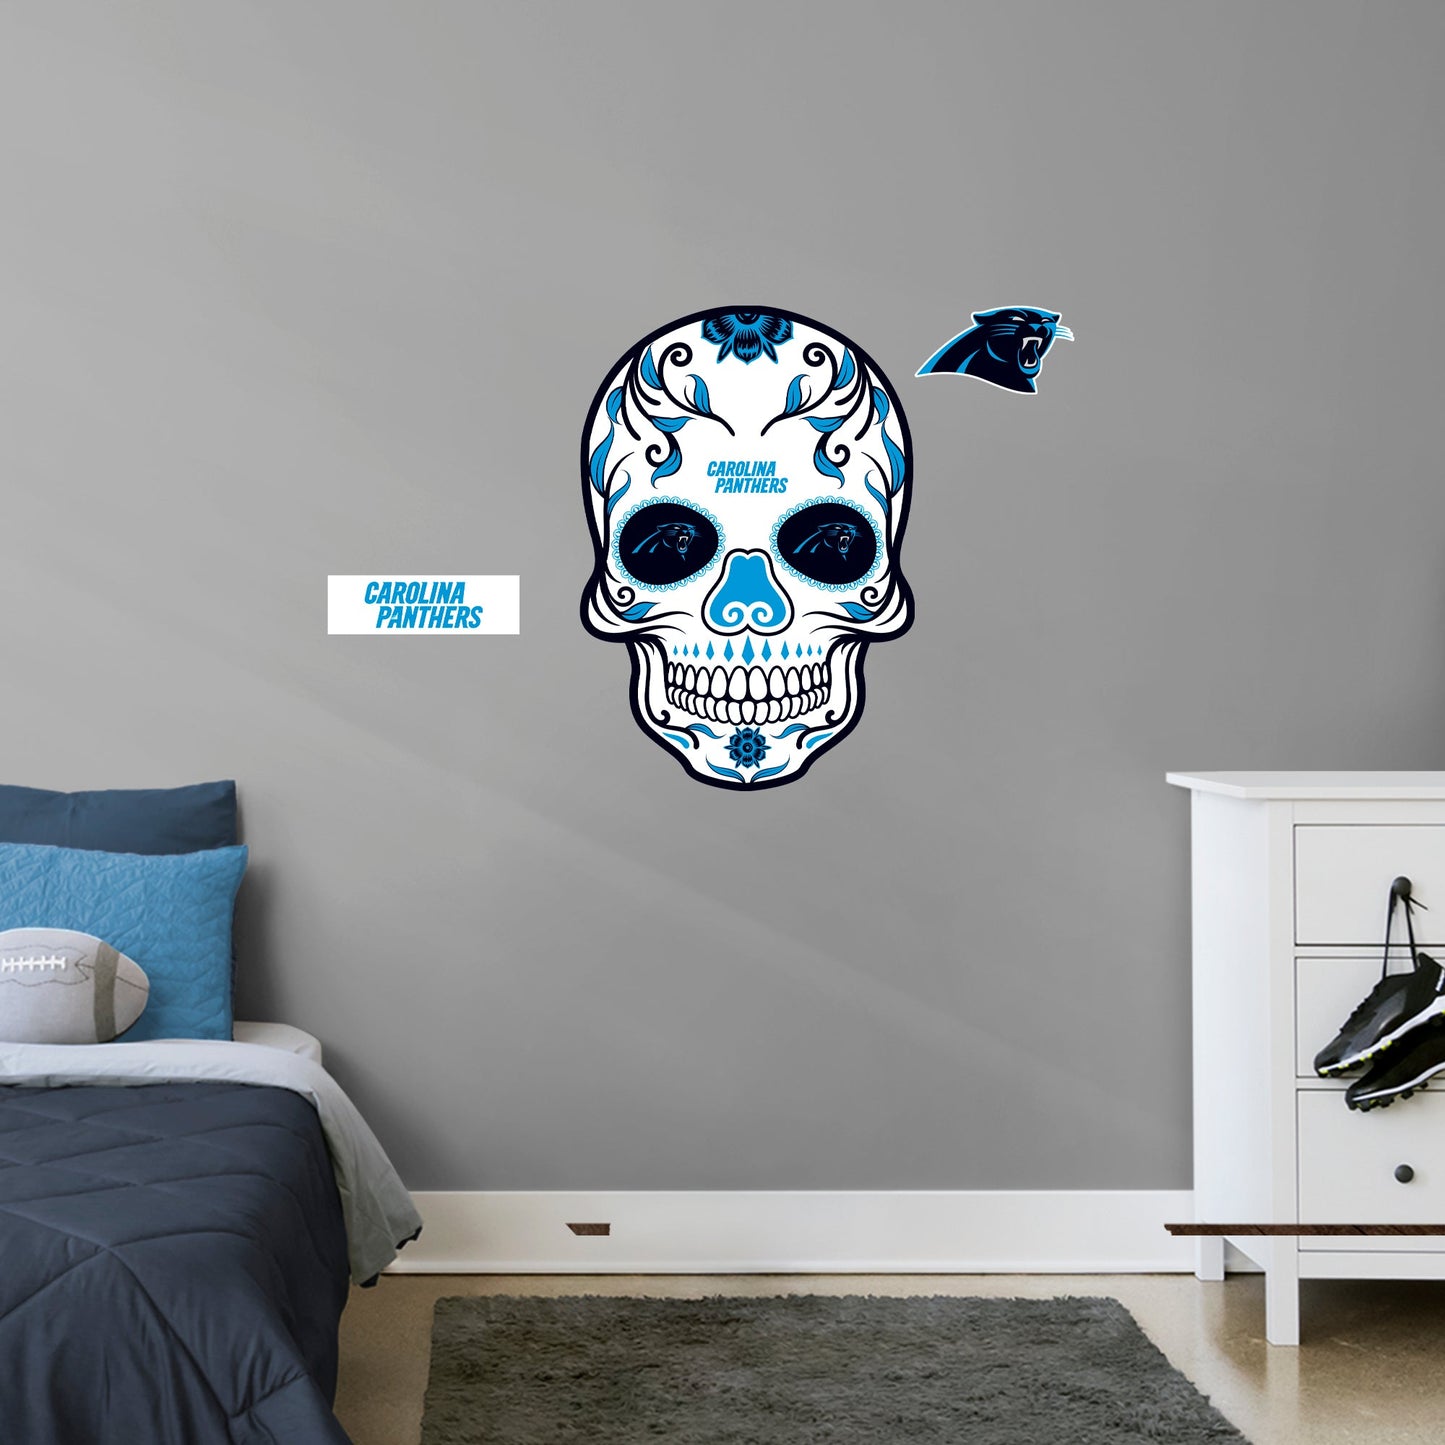 Carolina Panthers: Skull - Officially Licensed NFL Removable Adhesive Decal